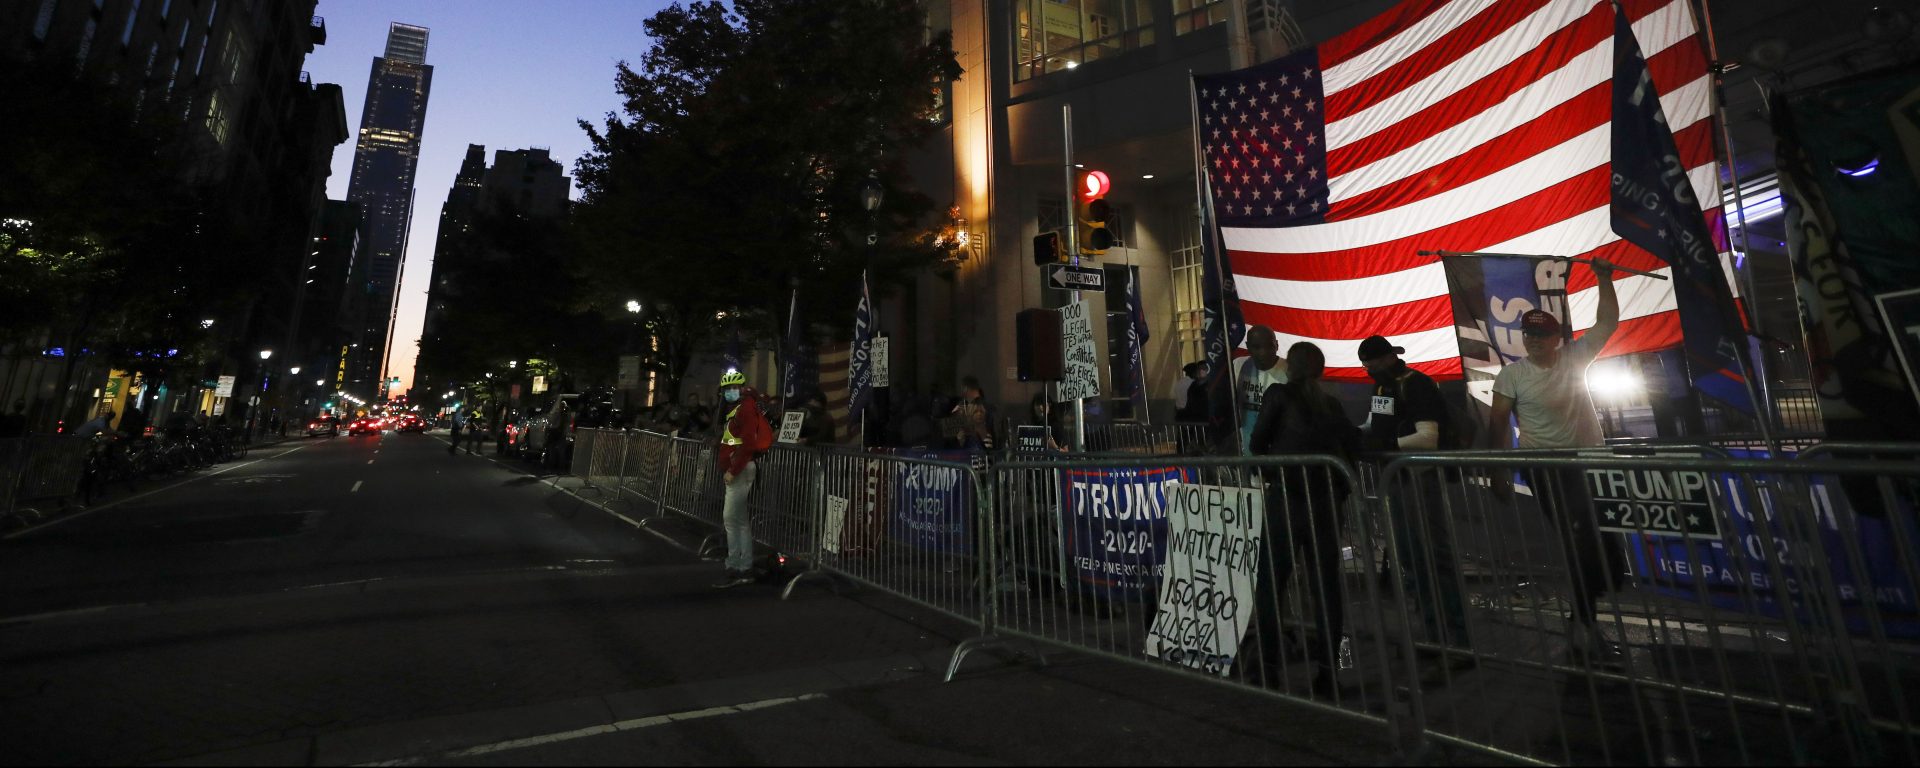 Supporters of President Donald Trump protest outside the Pennsylvania Convention Center in Philadelphia, Sunday, Nov. 8, 2020, a day after the 2020 election was called for Democrat Joe Biden.